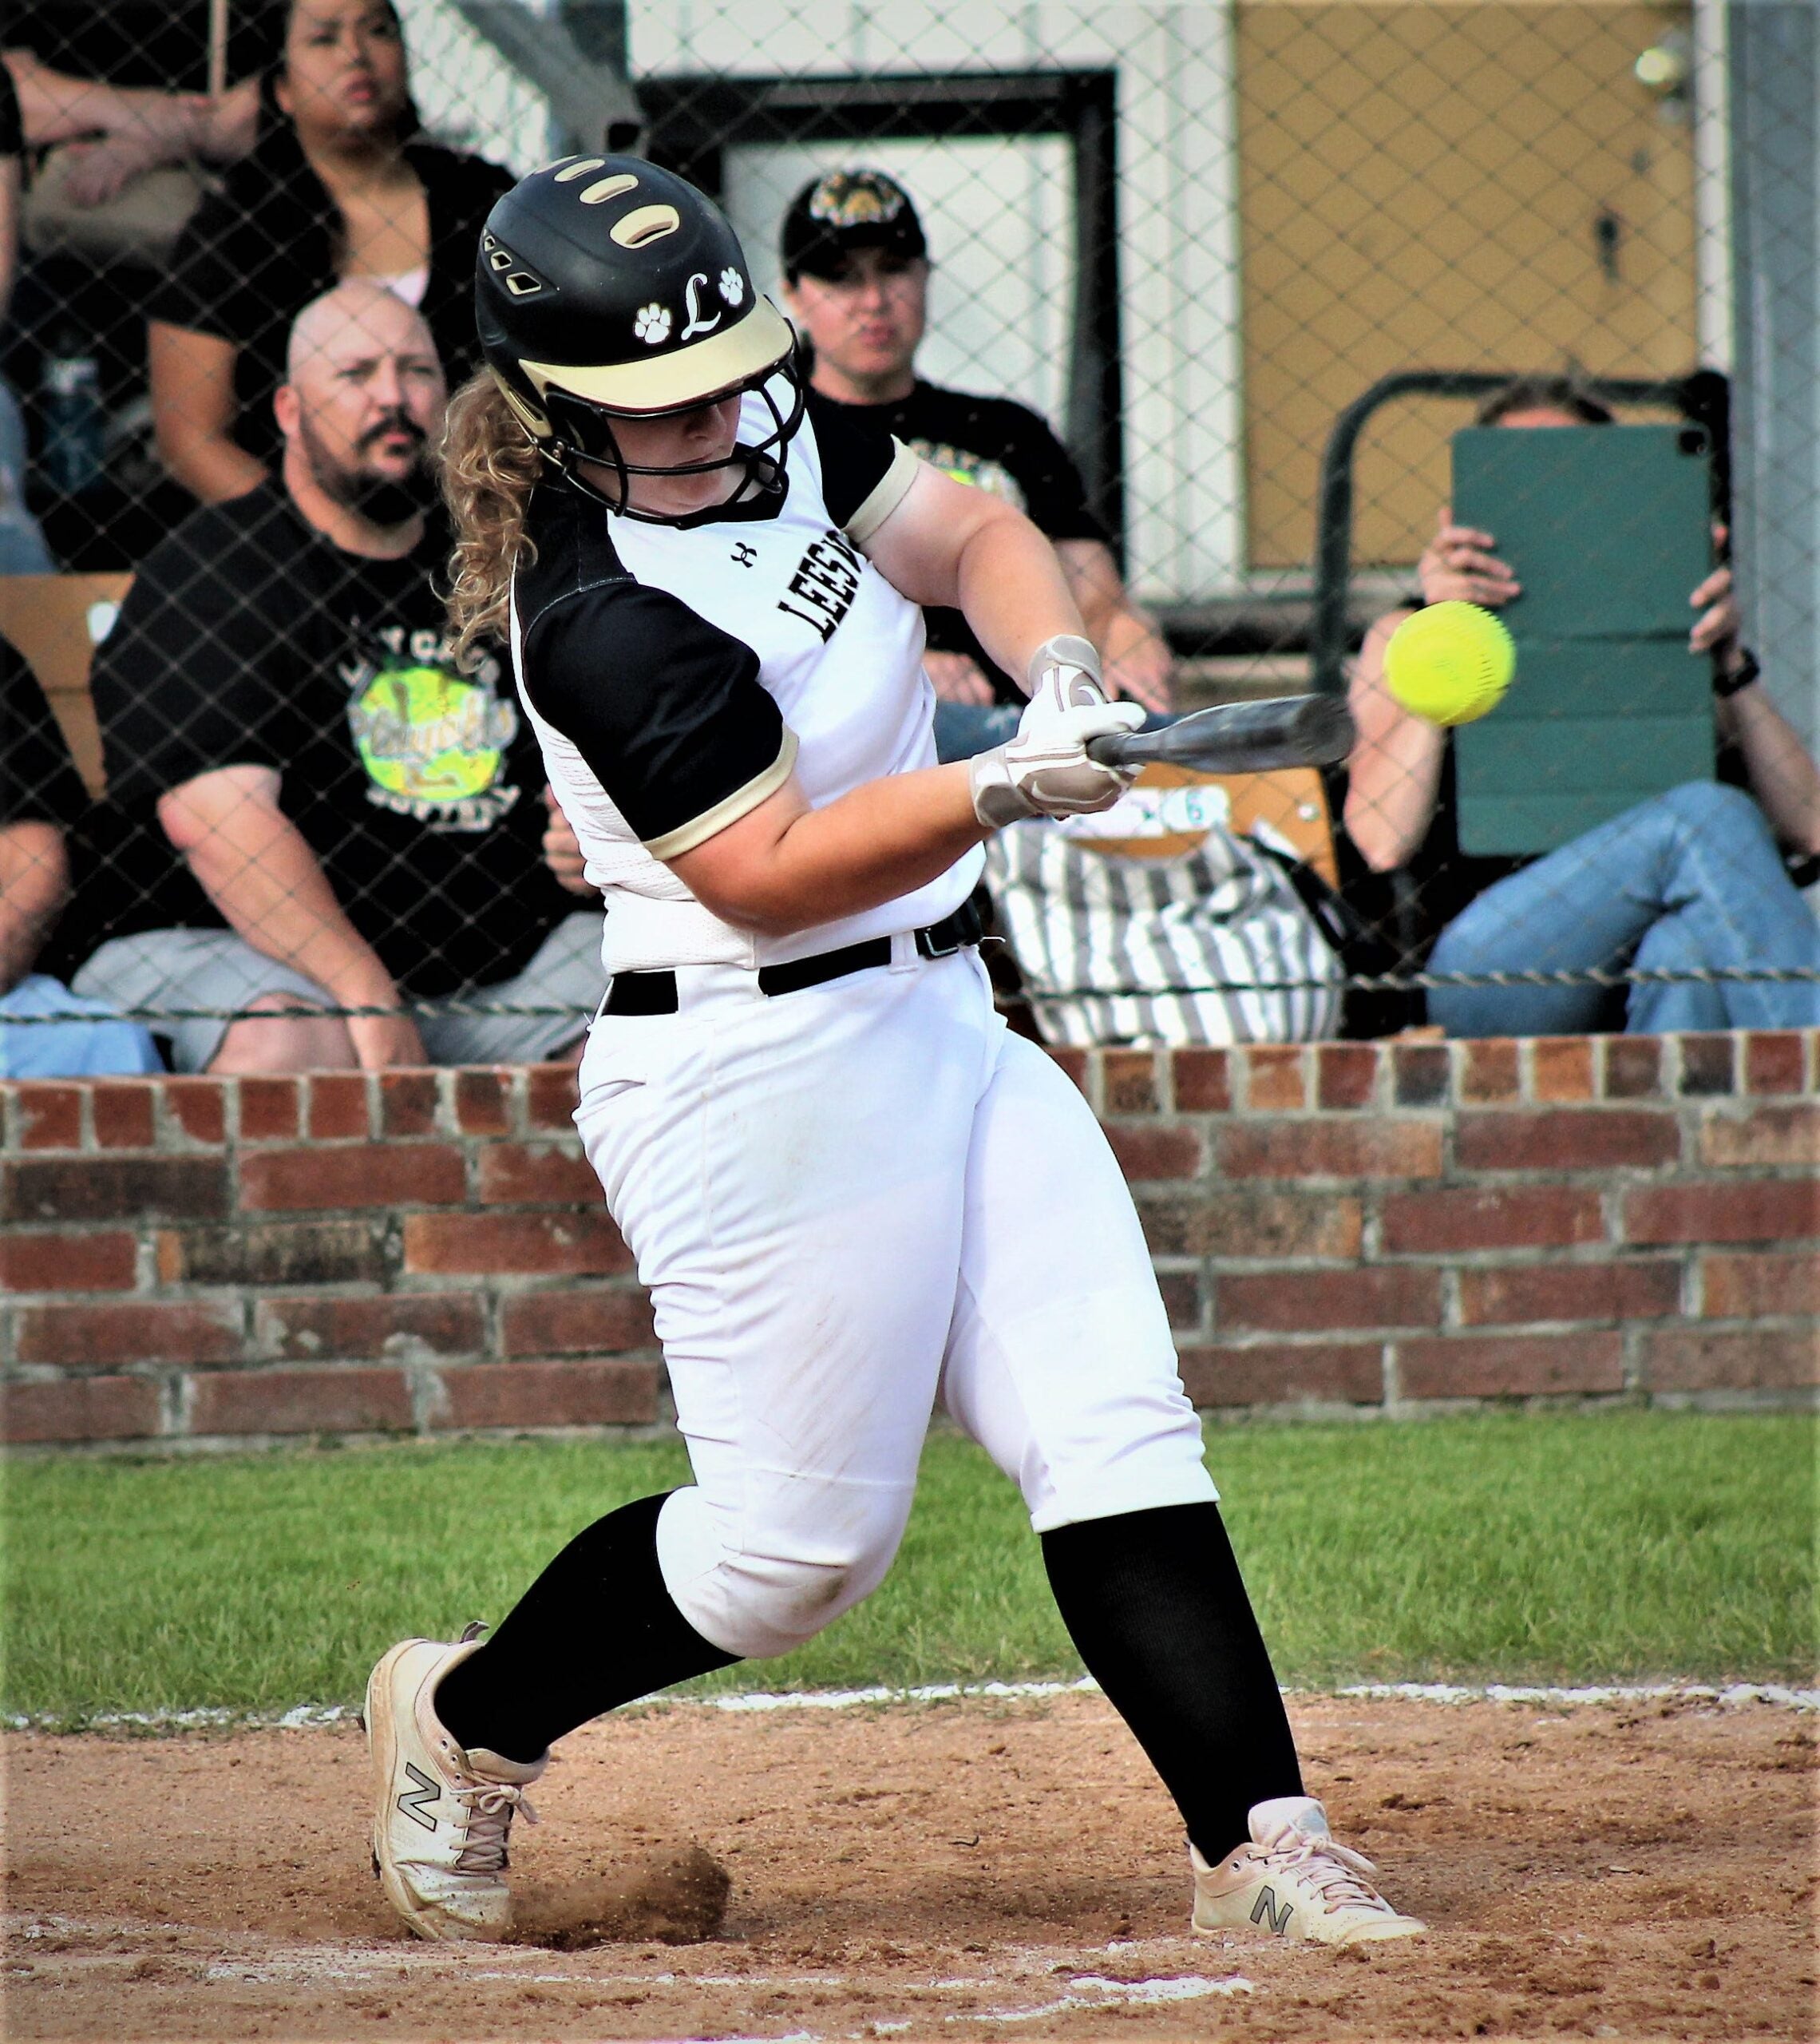 Lady Cats posted an 8-2 win over the Rayne Lady Wolves on Monday in the first round of the Class 4A playoffs.